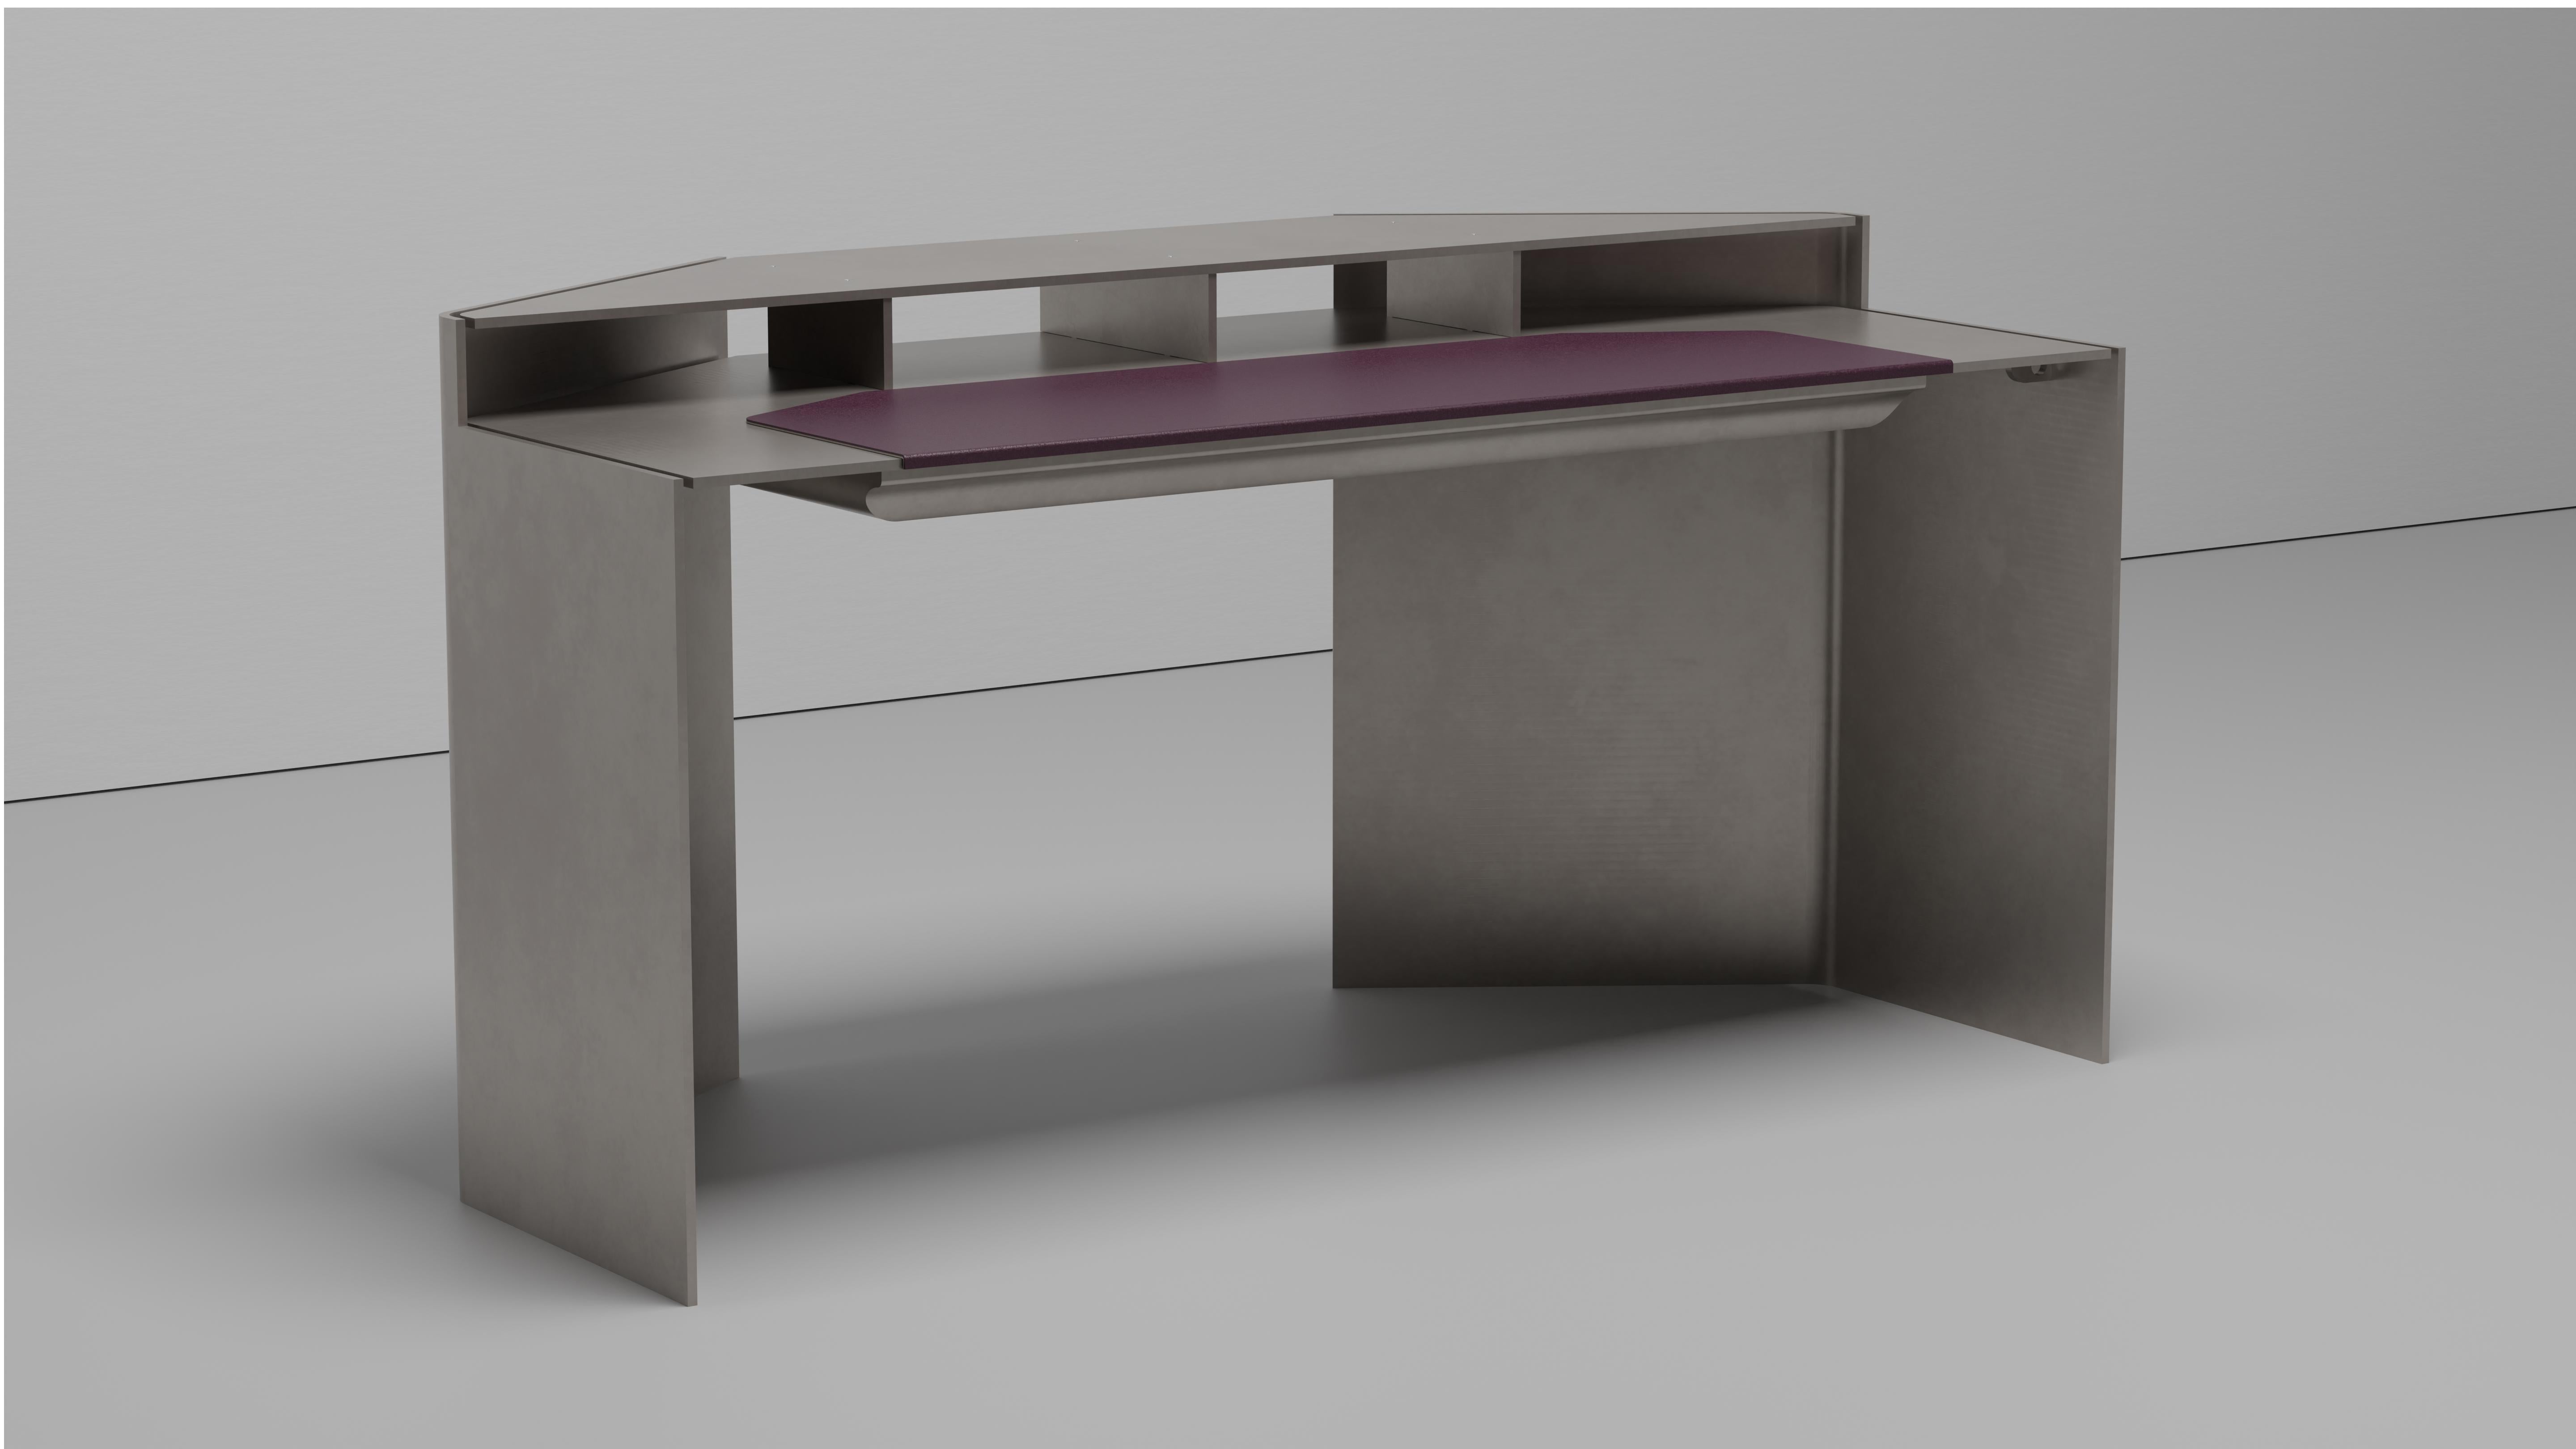 Next General desk made in three eights inch thick waxed aluminum. The tiered top has cord drop offsets in the back as well as the bottom. Variations, leather and powder colors are available upon request. Writing surface of the desk height is 28.65